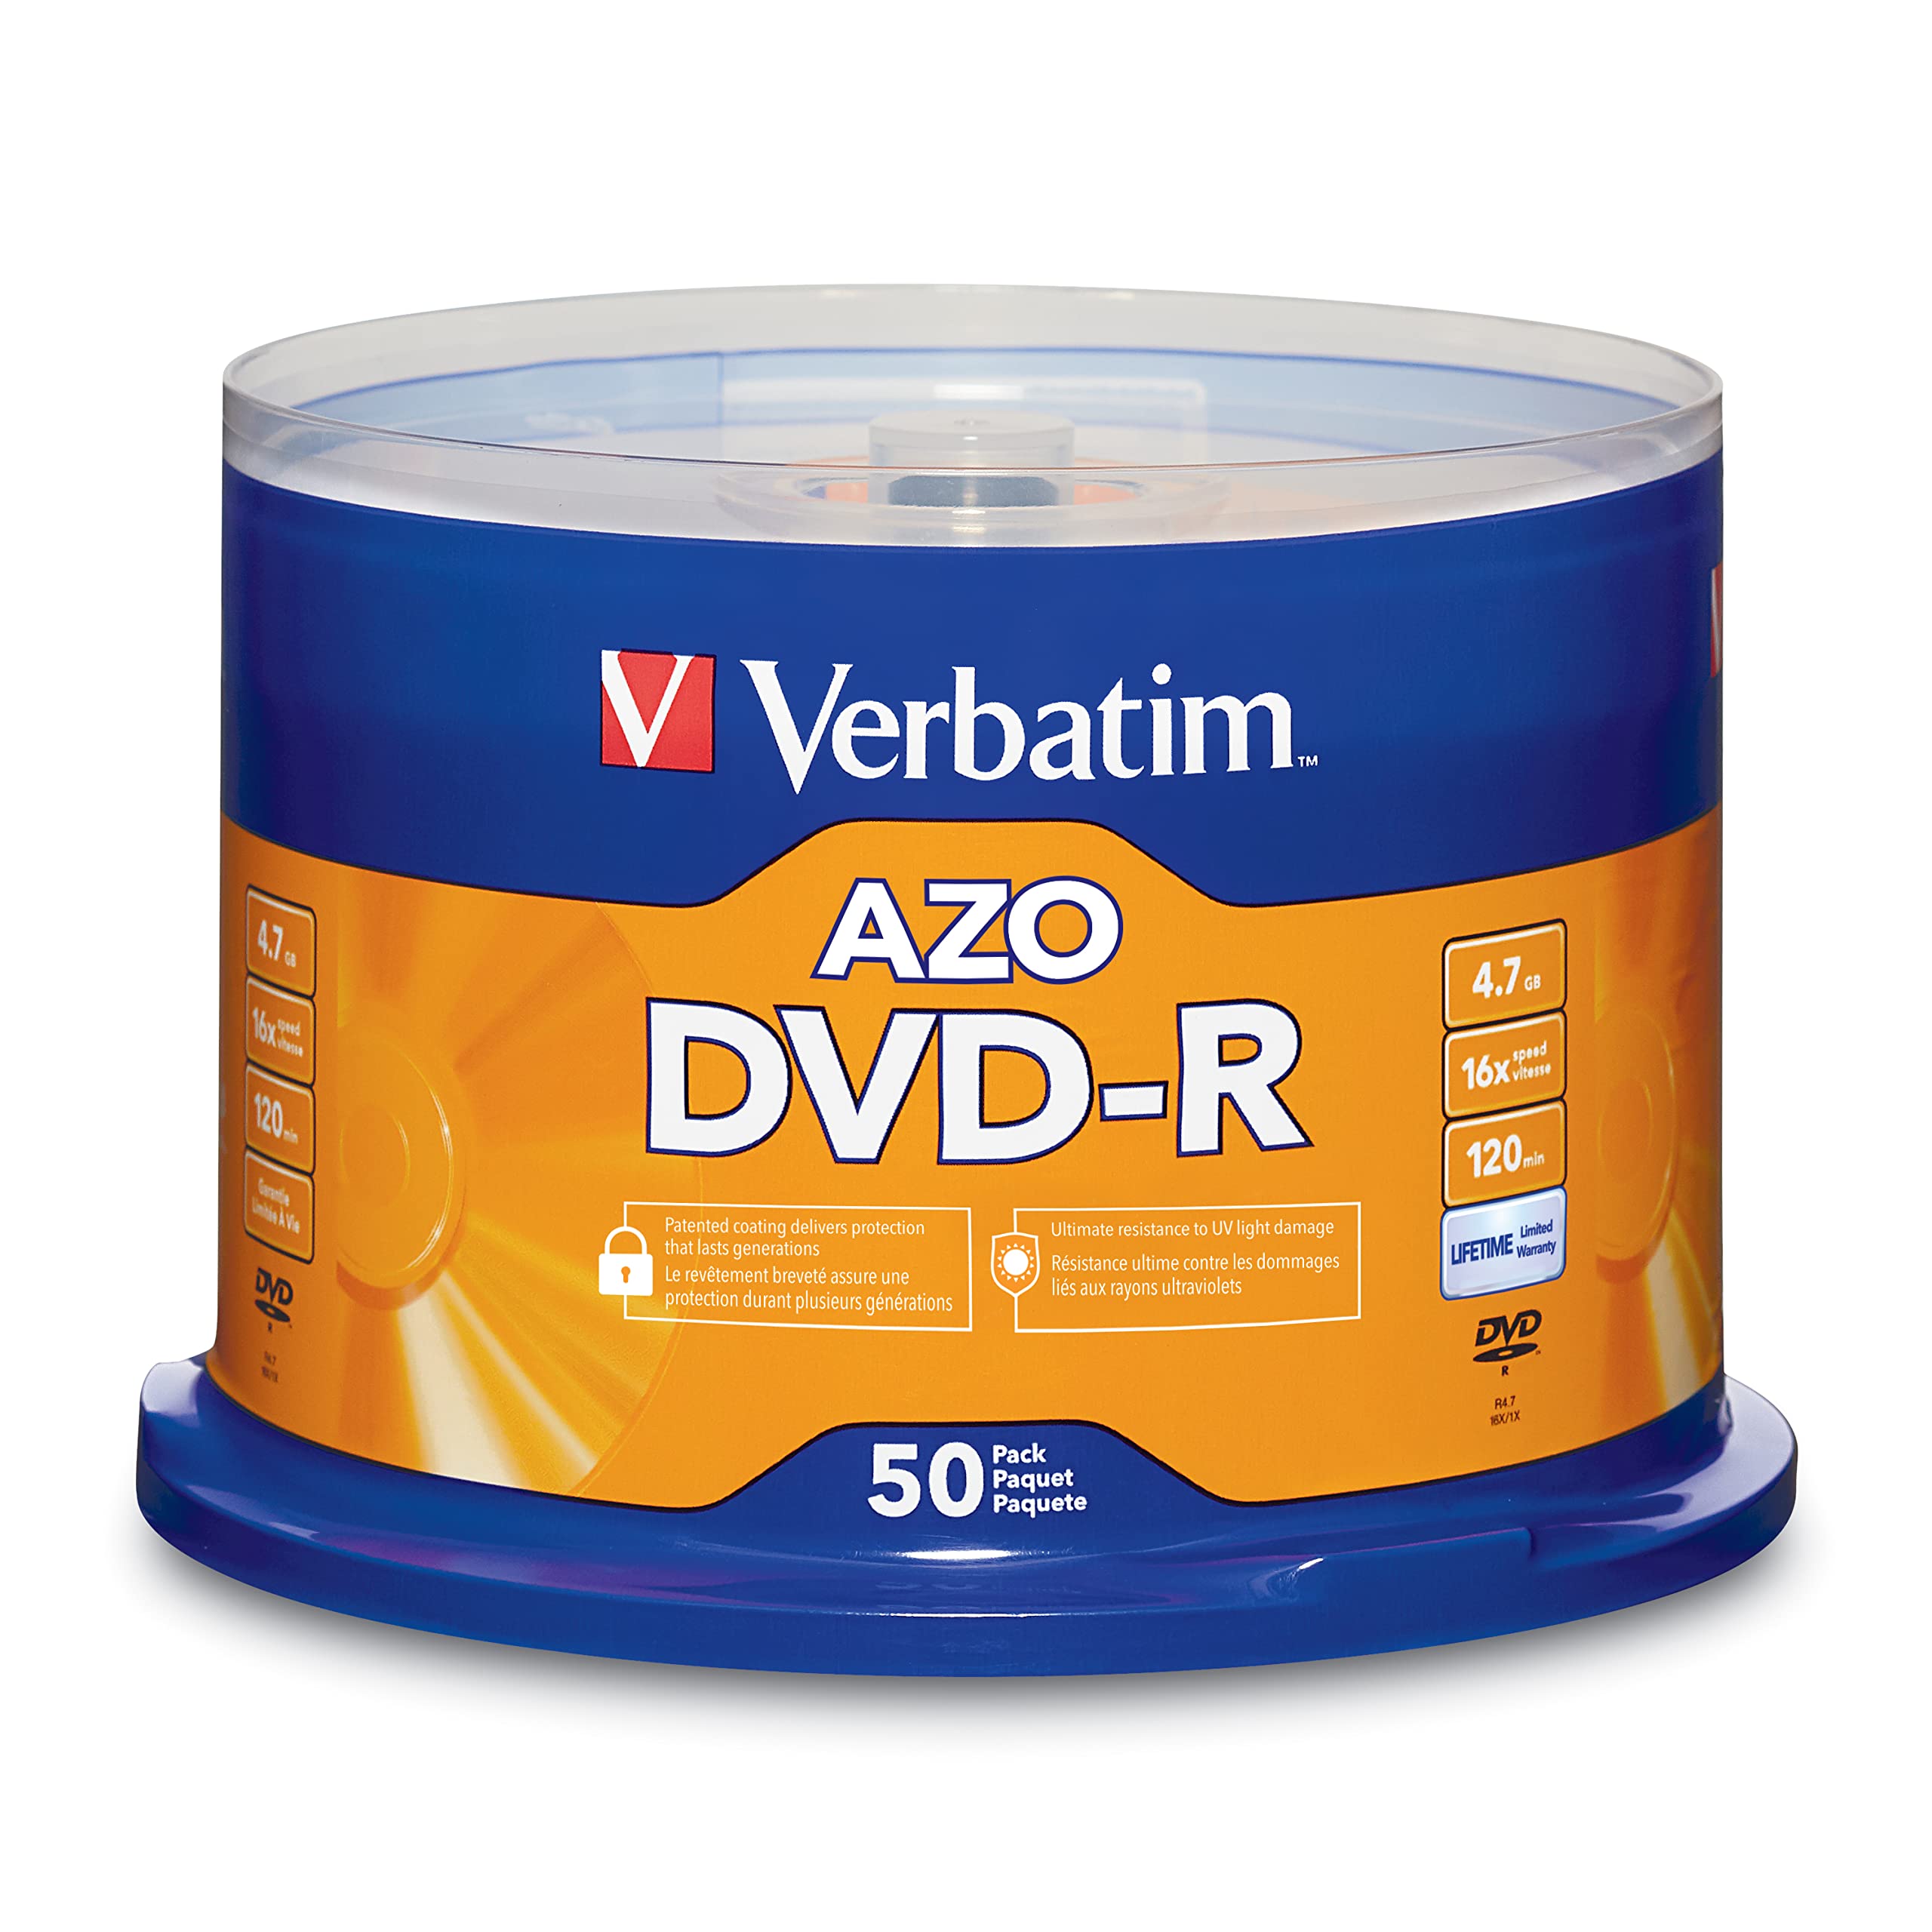 Verbatim DVD-R Blank Discs AZO Dye 4.7GB 16X Recordable Disc - 50 Pack Spindle,Silver